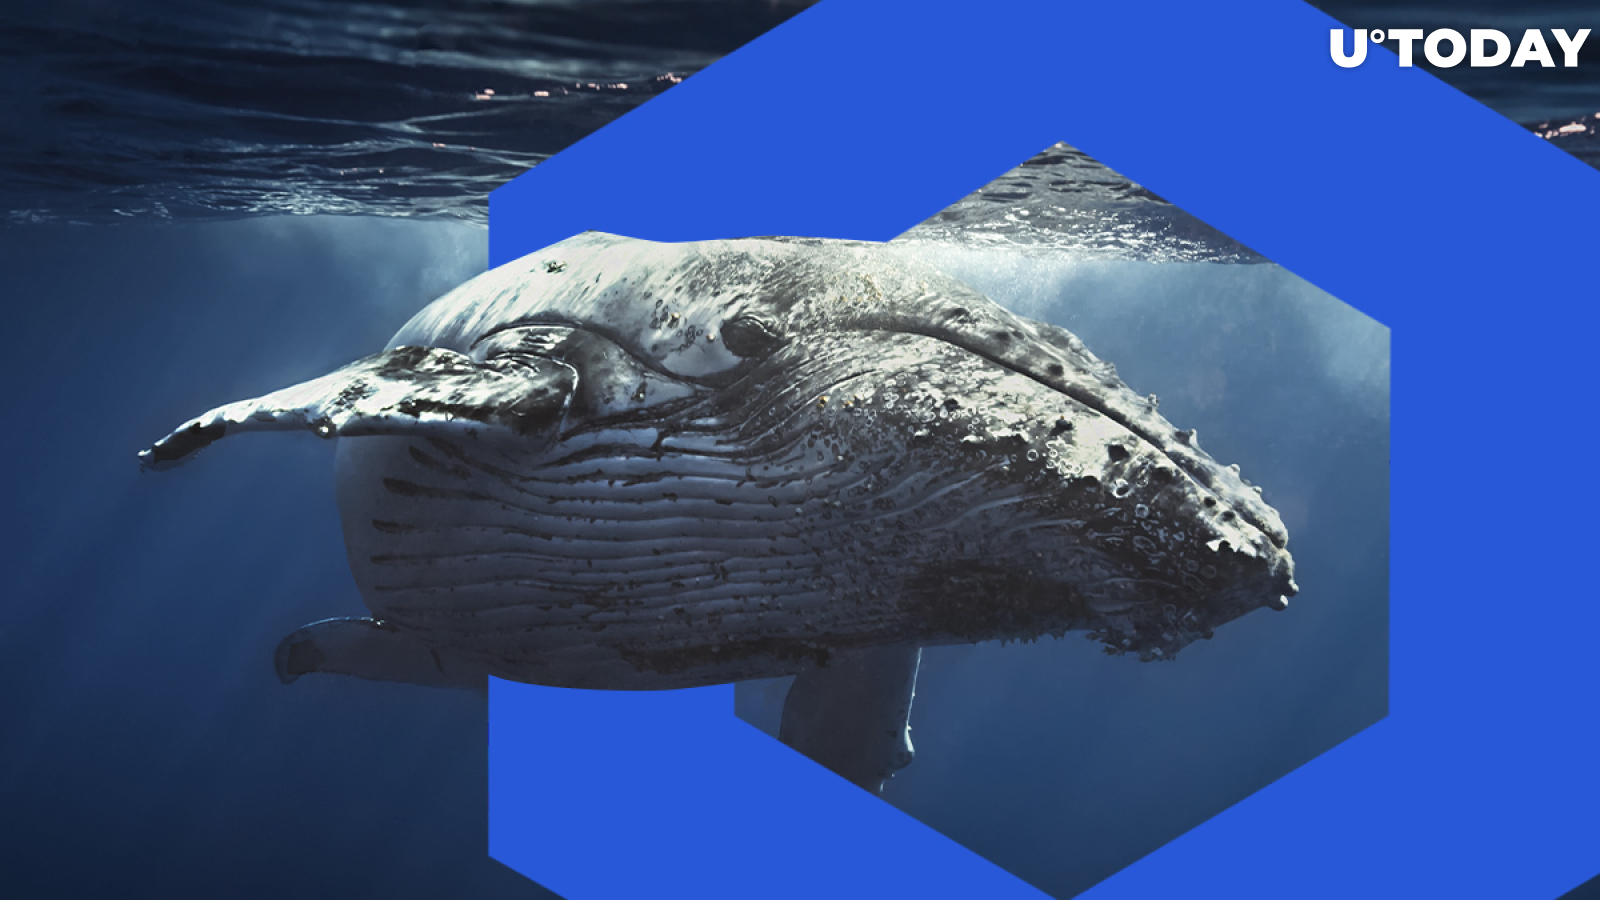 Crypto Whales Now Hold 10% Less LINK than in December 2019, Here's Why